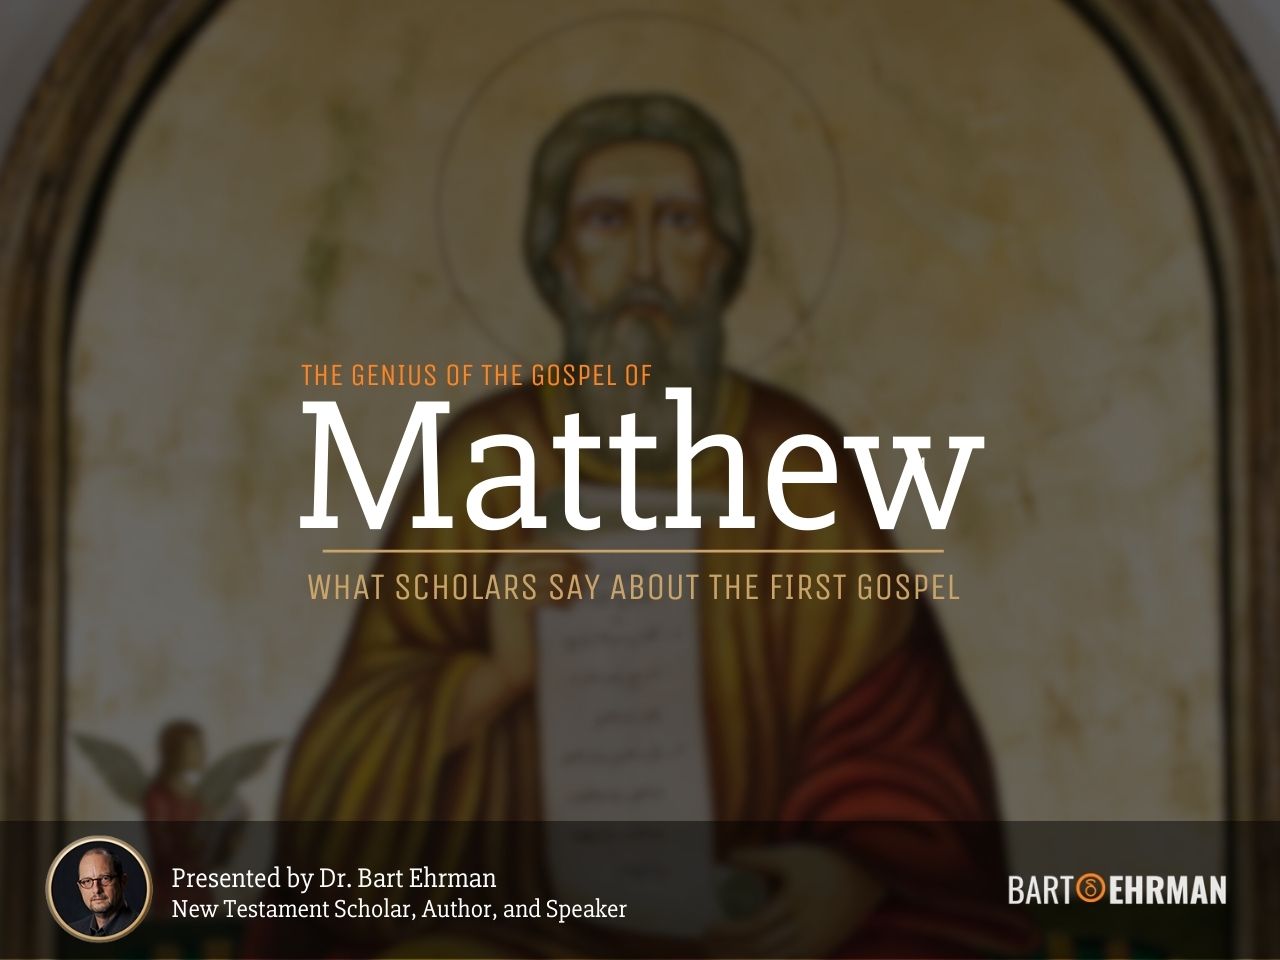 The Genius of the Gospel of Matthew Online Course by Dr. Bart Ehrman